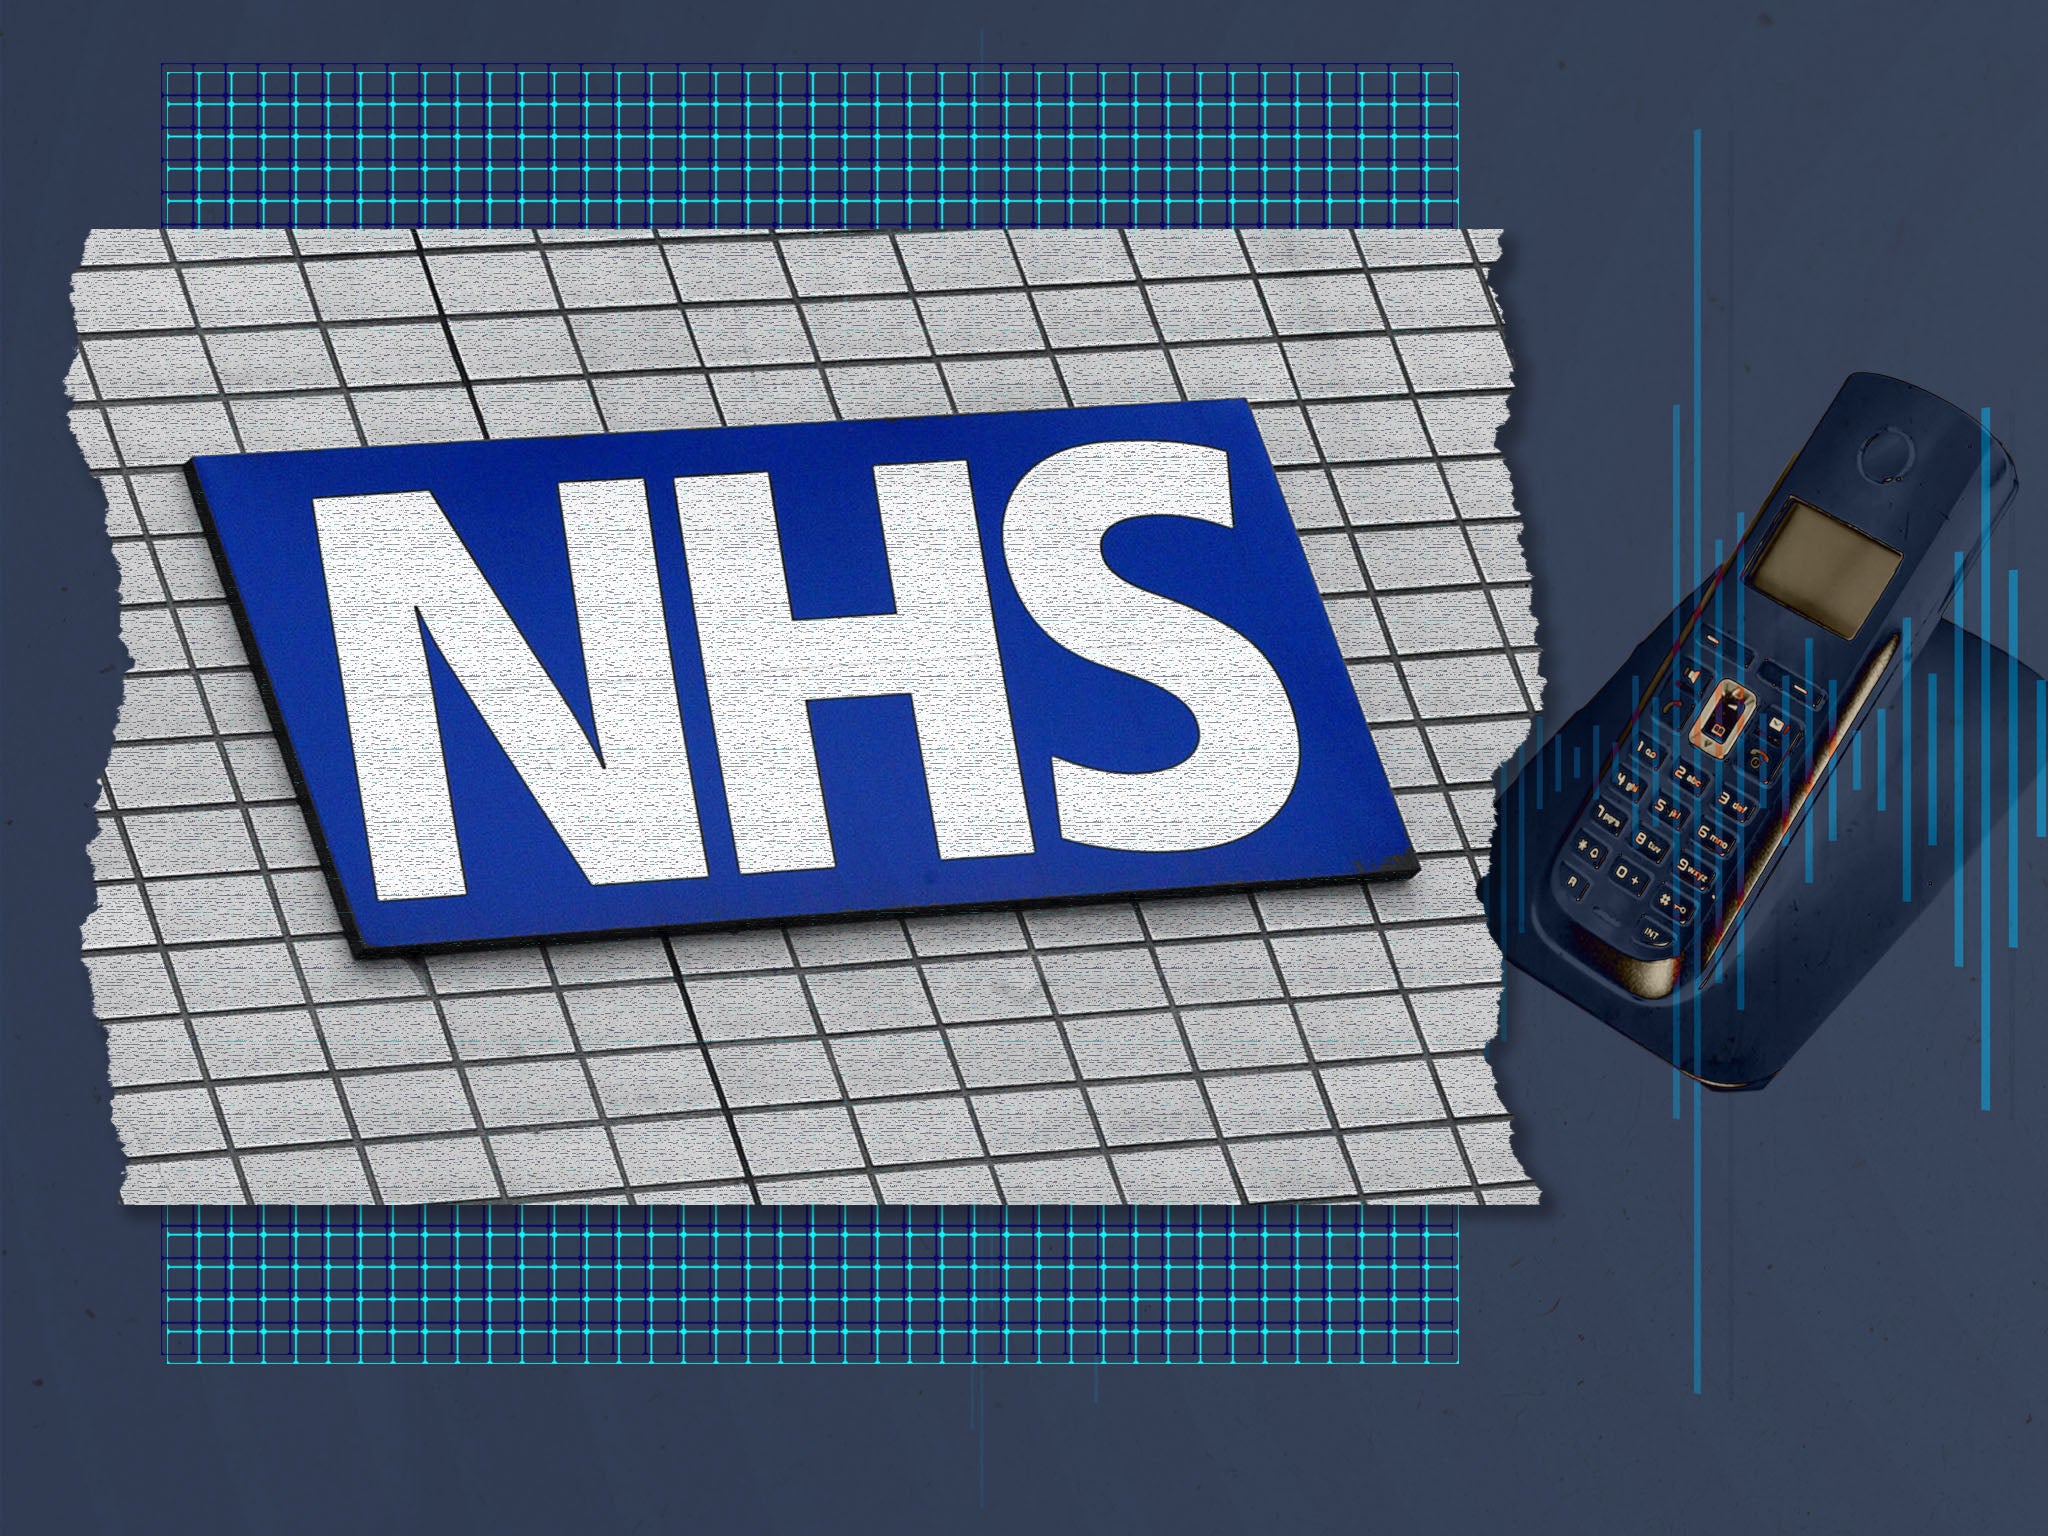 The NHS 111 service is a phone line and website